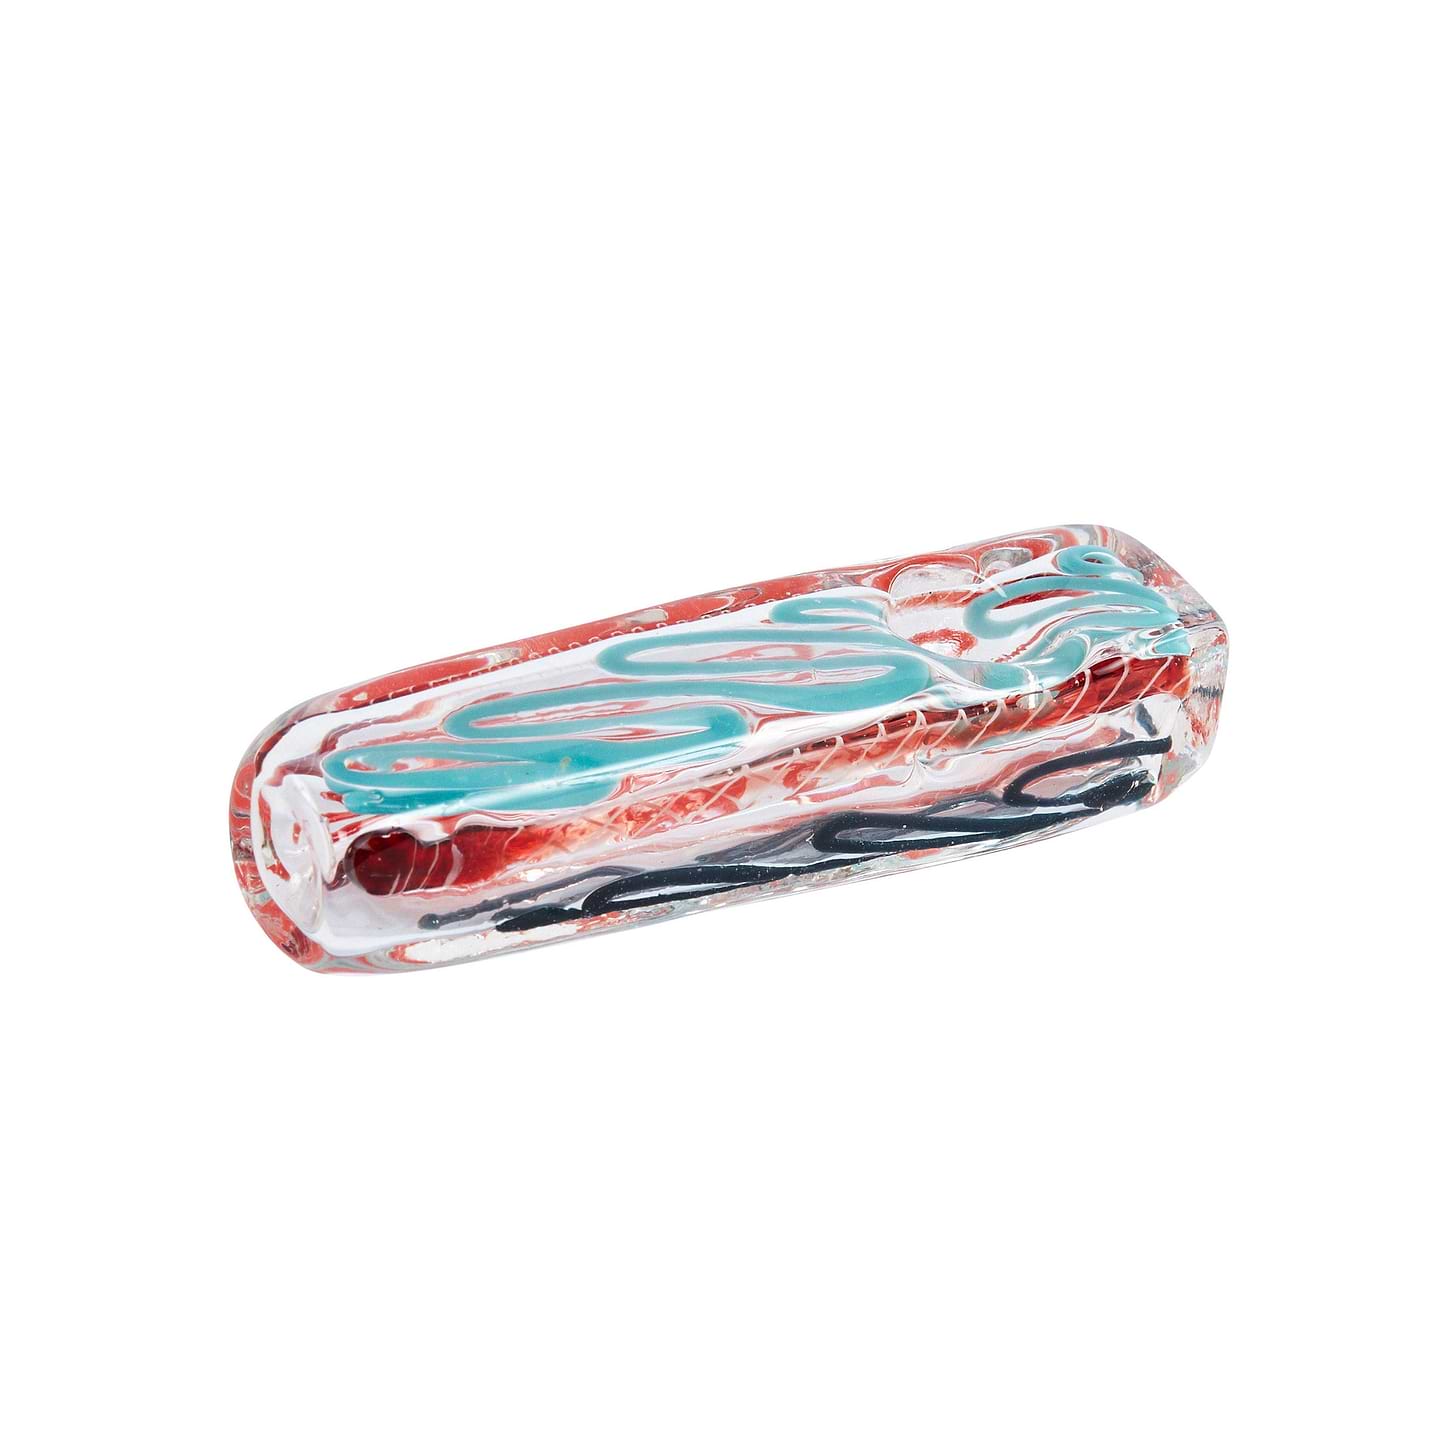 4-inch handy striped steam roller made of hand blown borosilicate glass and attractive dual-colored swirls